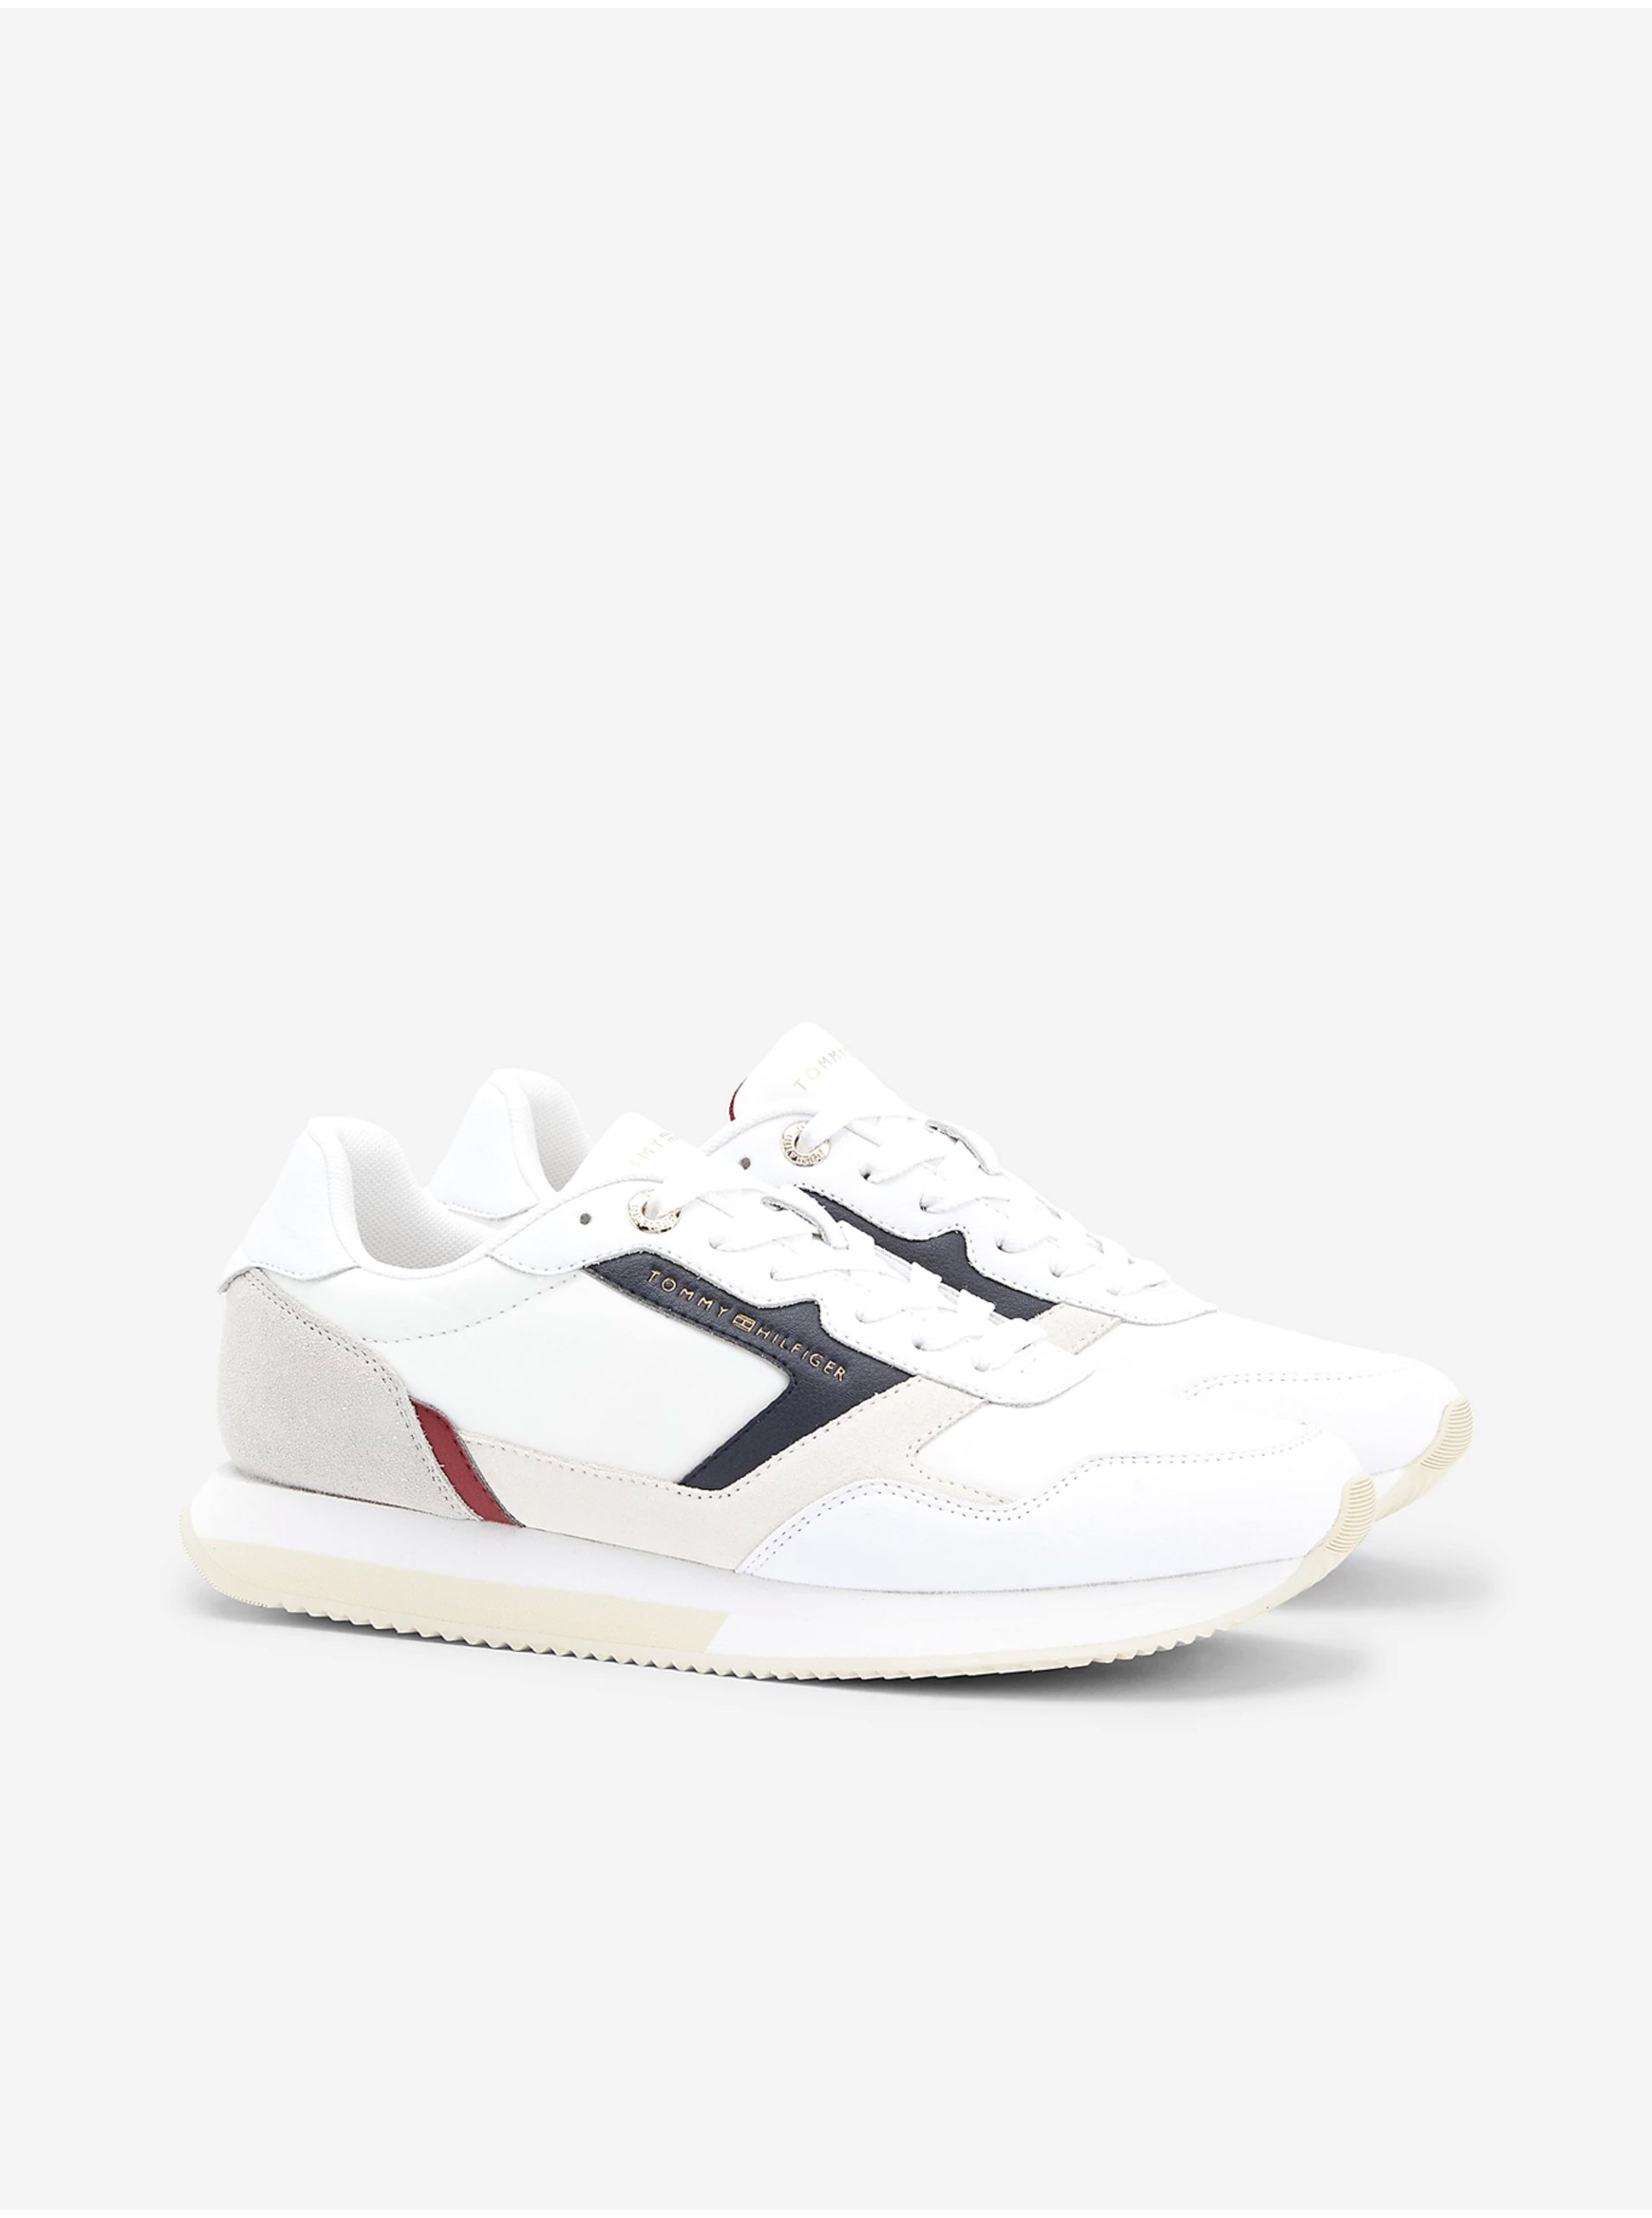 Tommy Hilfiger Essential Runner White Women's Leather Sneakers - Women